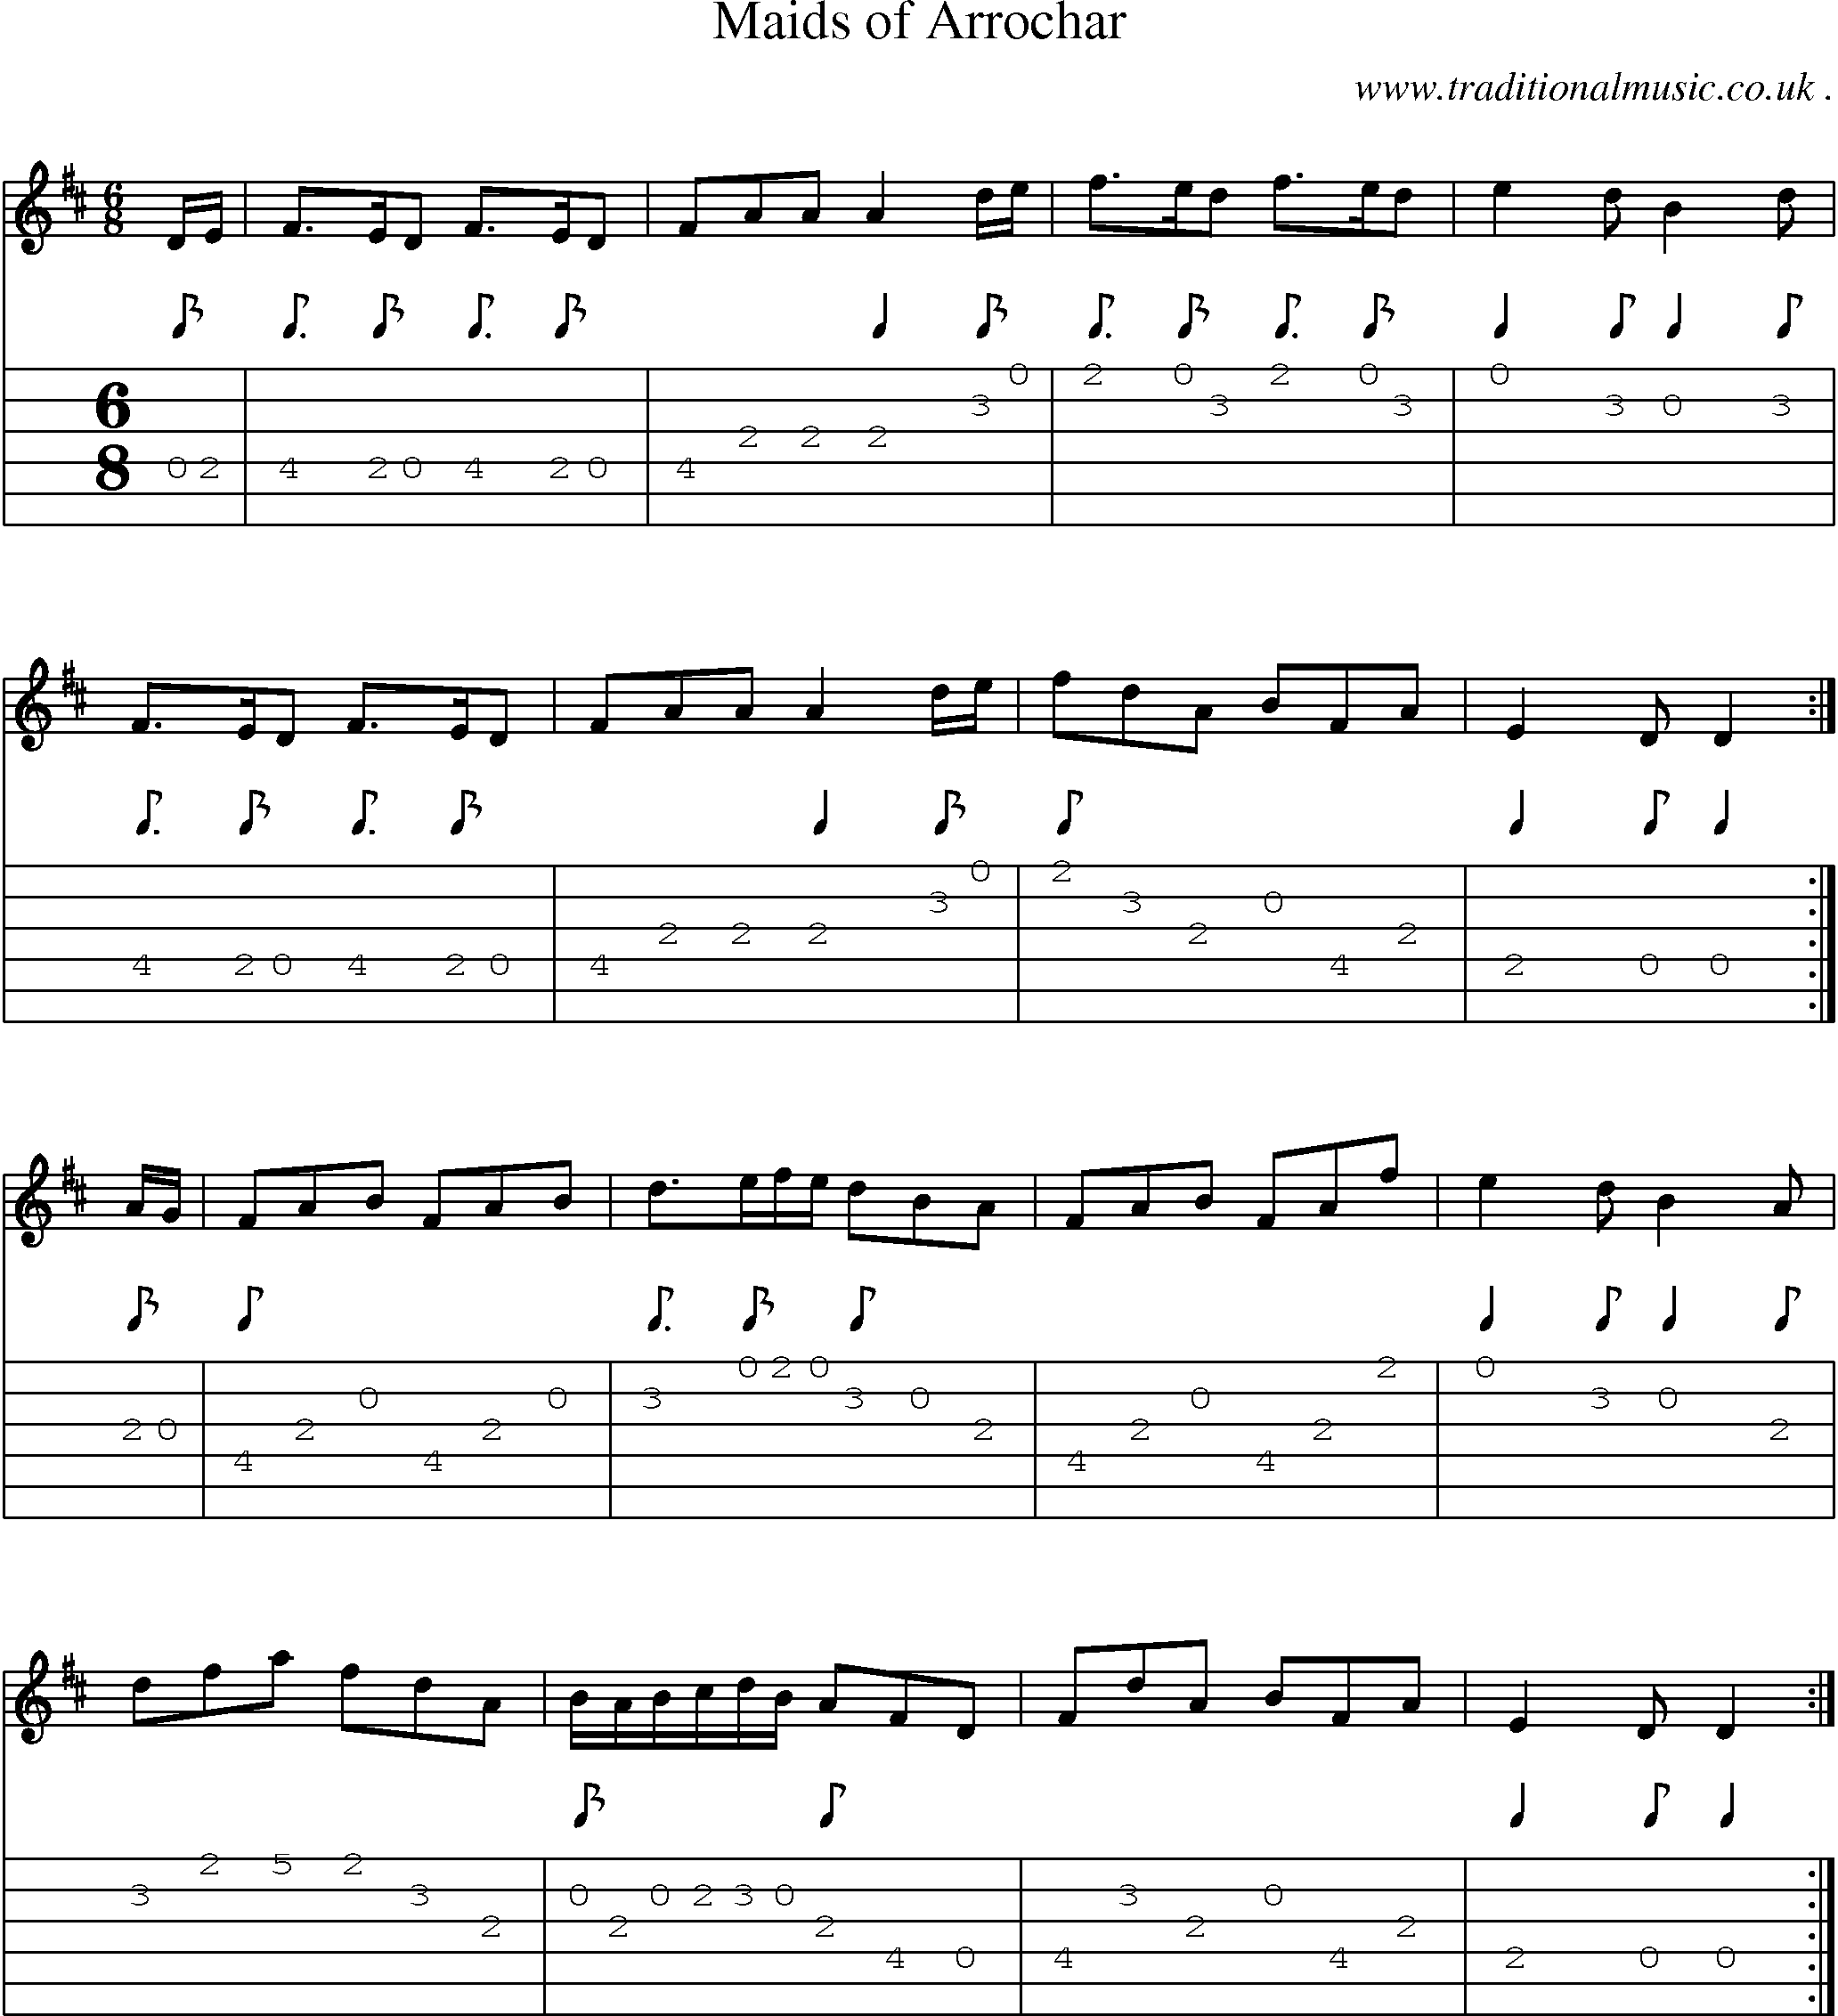 Sheet-music  score, Chords and Guitar Tabs for Maids Of Arrochar